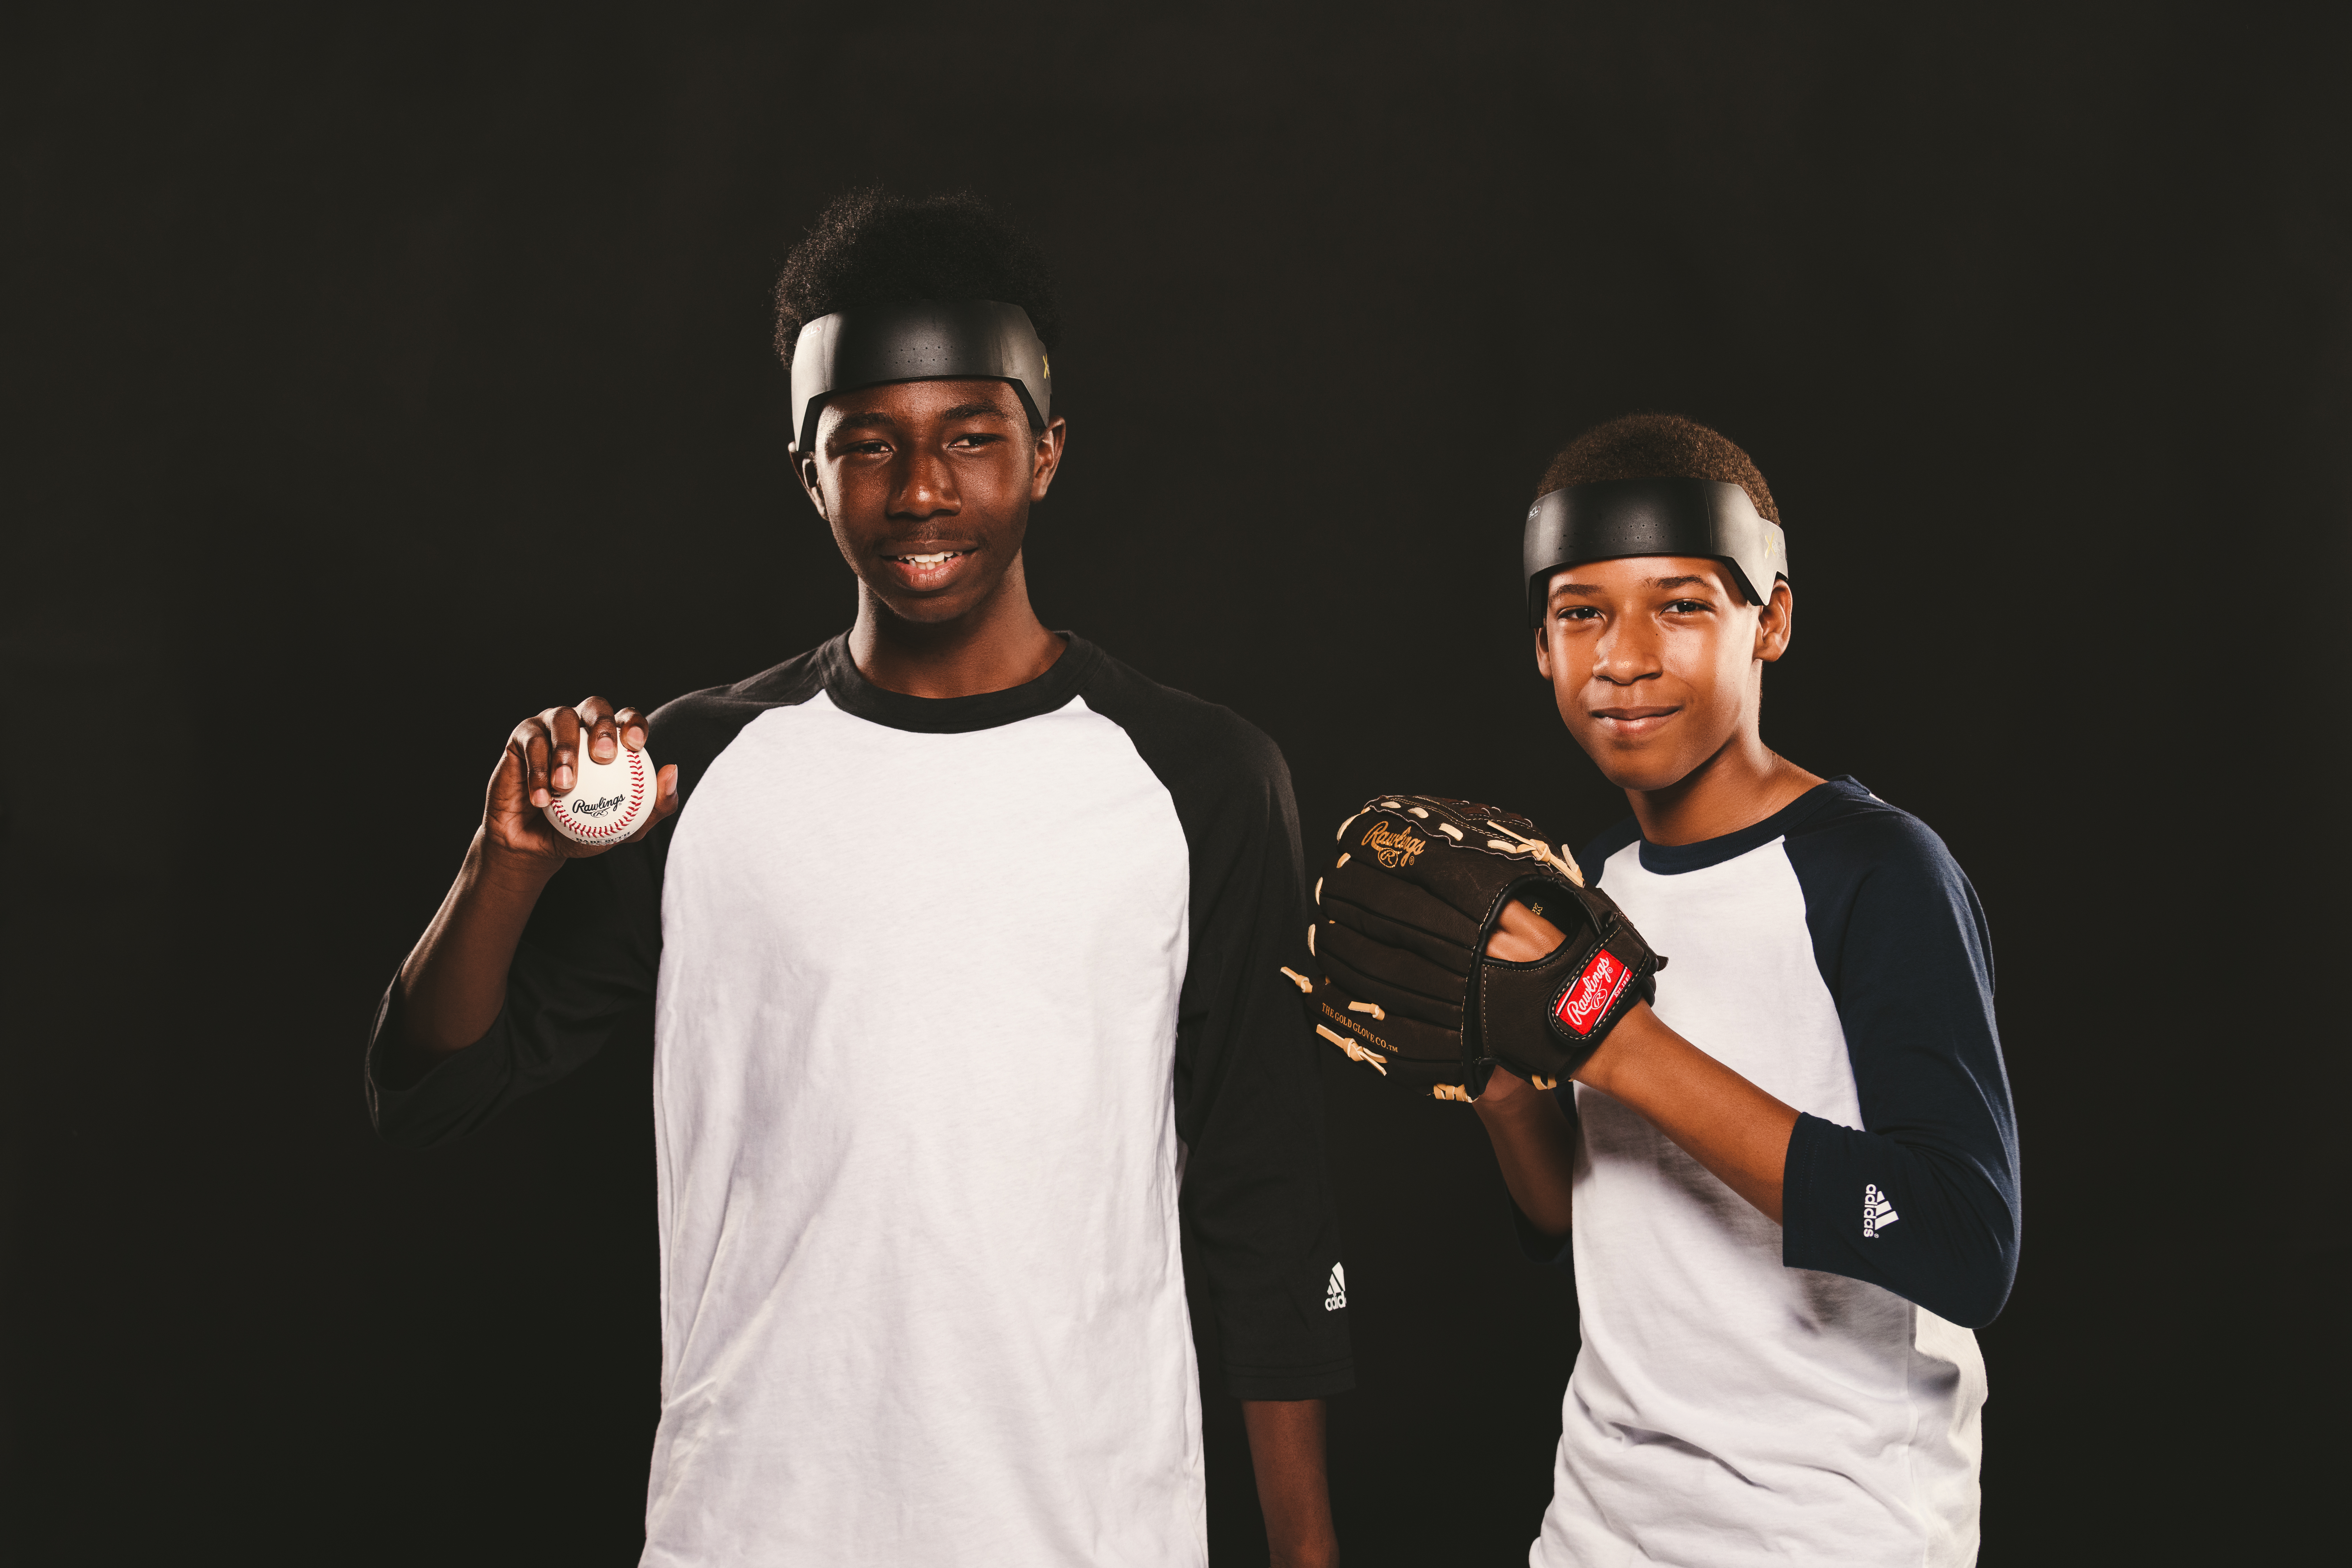 IU C&I Studios Ball Cap Liner Two young baseball players wearing BCLs with one holding a baseball and the other wearing a baseball mitt posing for the camera